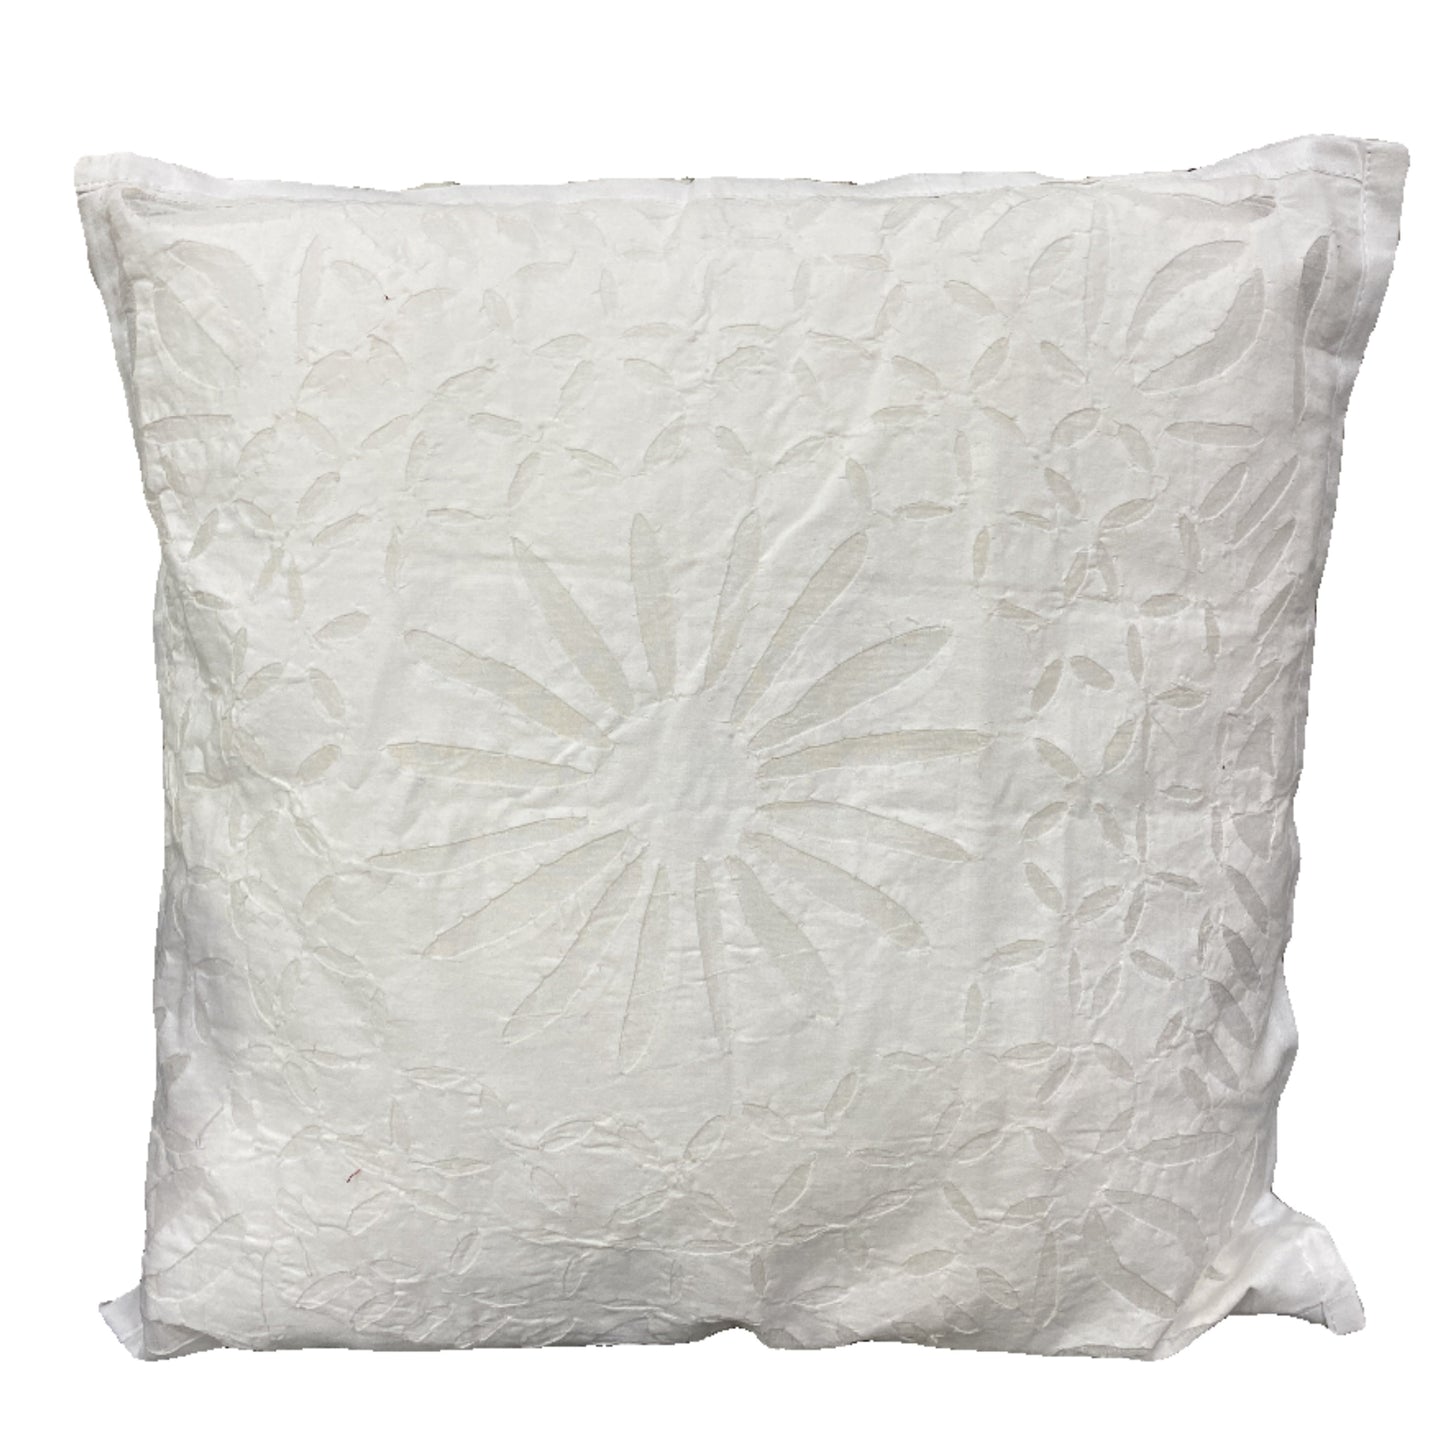 Hand Cut and Appliqued Throw Pillow Cases - White